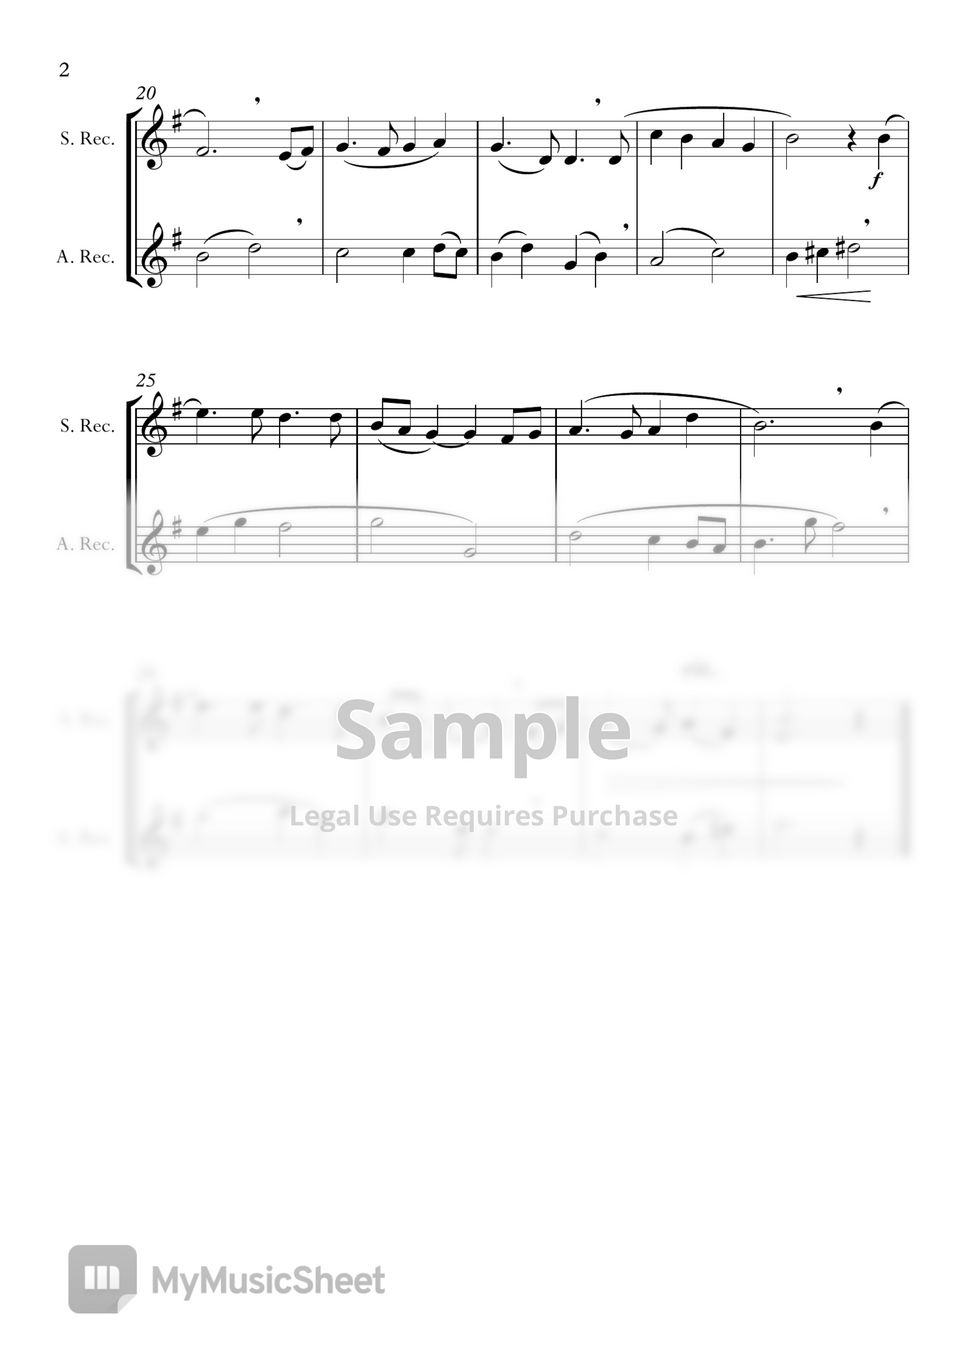 Joe Hisaishi - Carrying You [Laputa: Castle in the Sky] for Recorder (SA) (Easy) by Your Own Fantasia